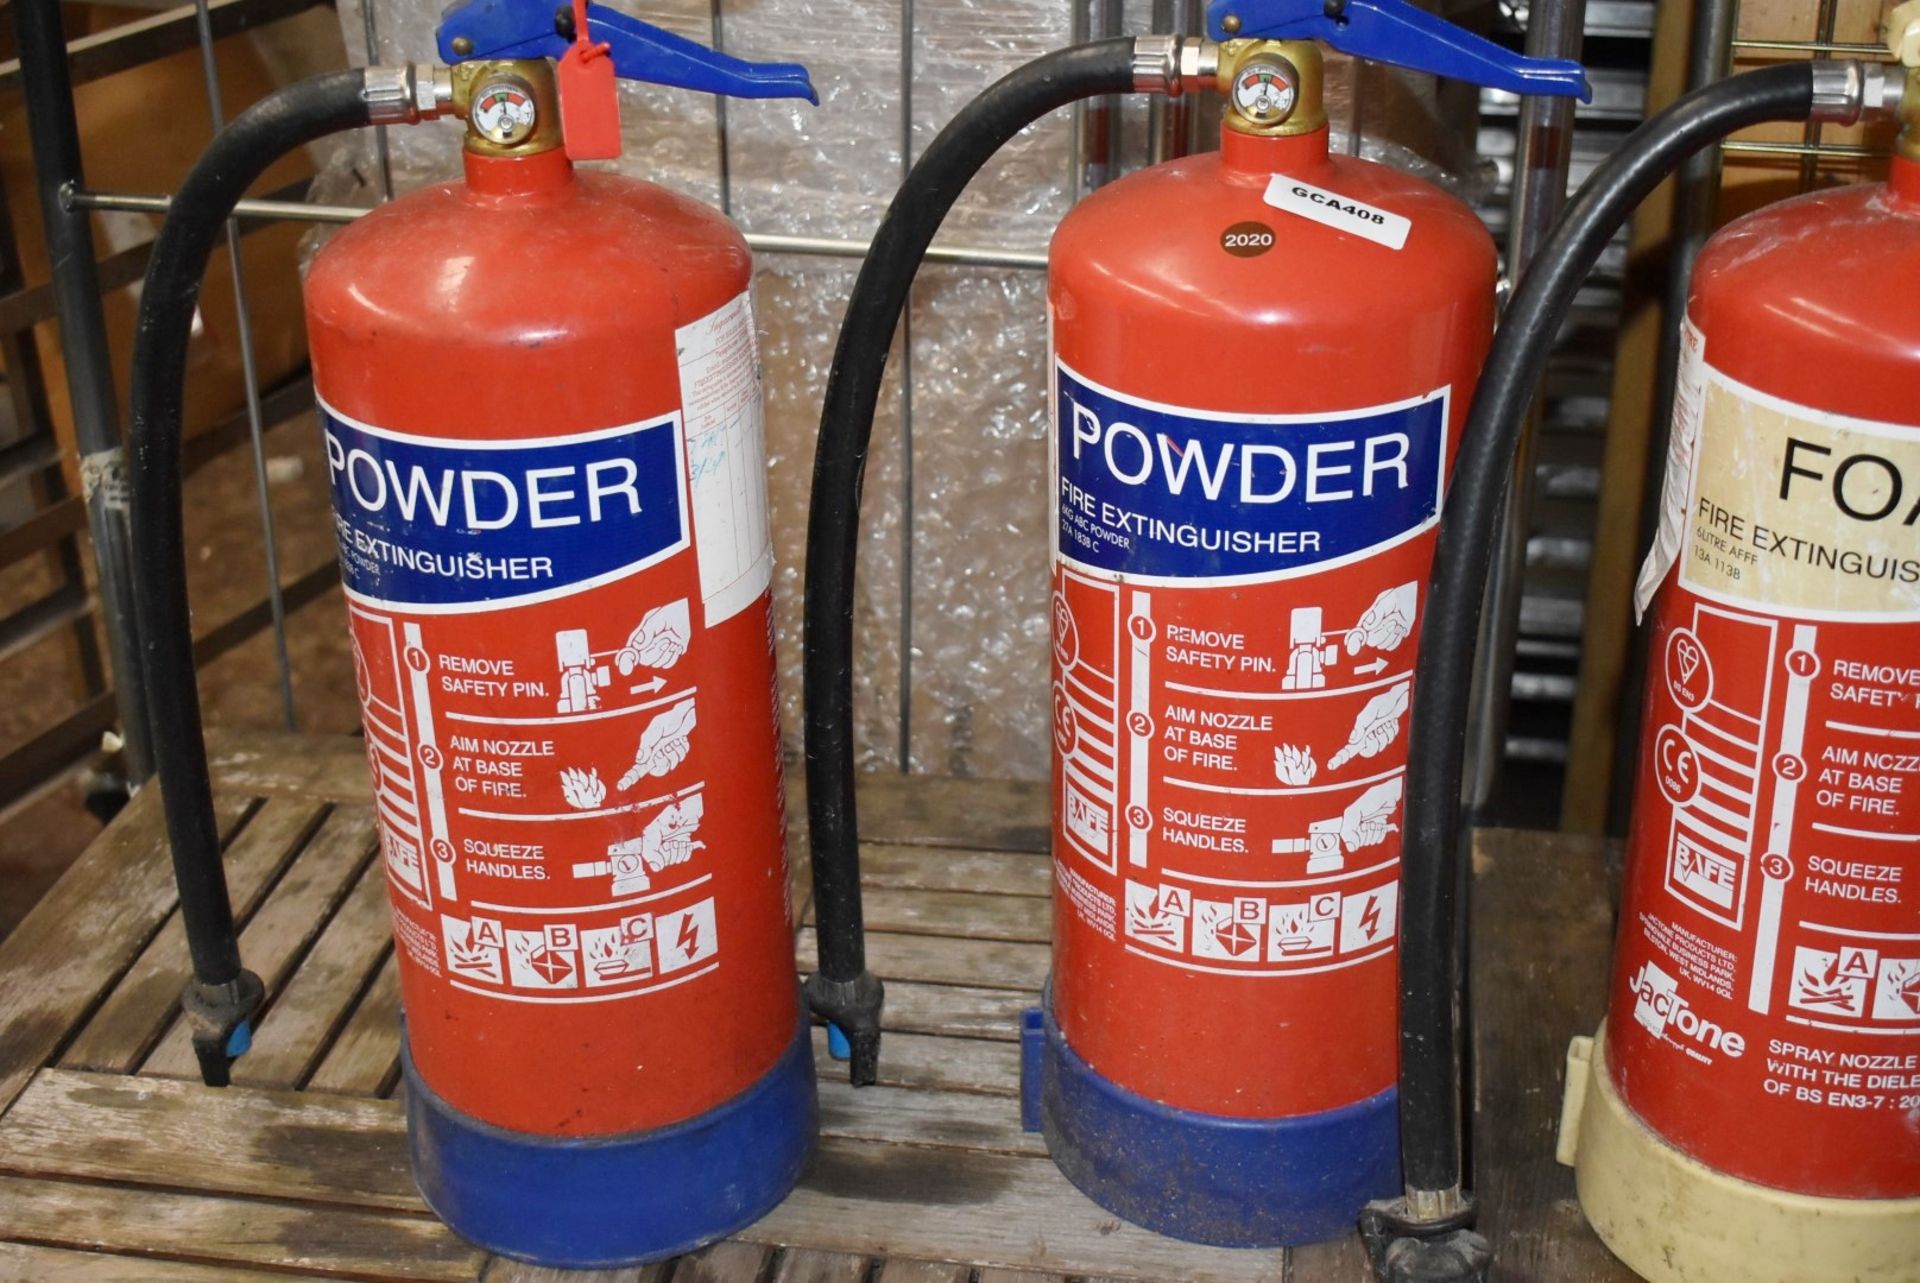 4 x Various Fire Extinguishers - Includes Power, Foam and Wet Chemical - CL011 - Ref: GCA408 WH5 - - Image 4 of 4